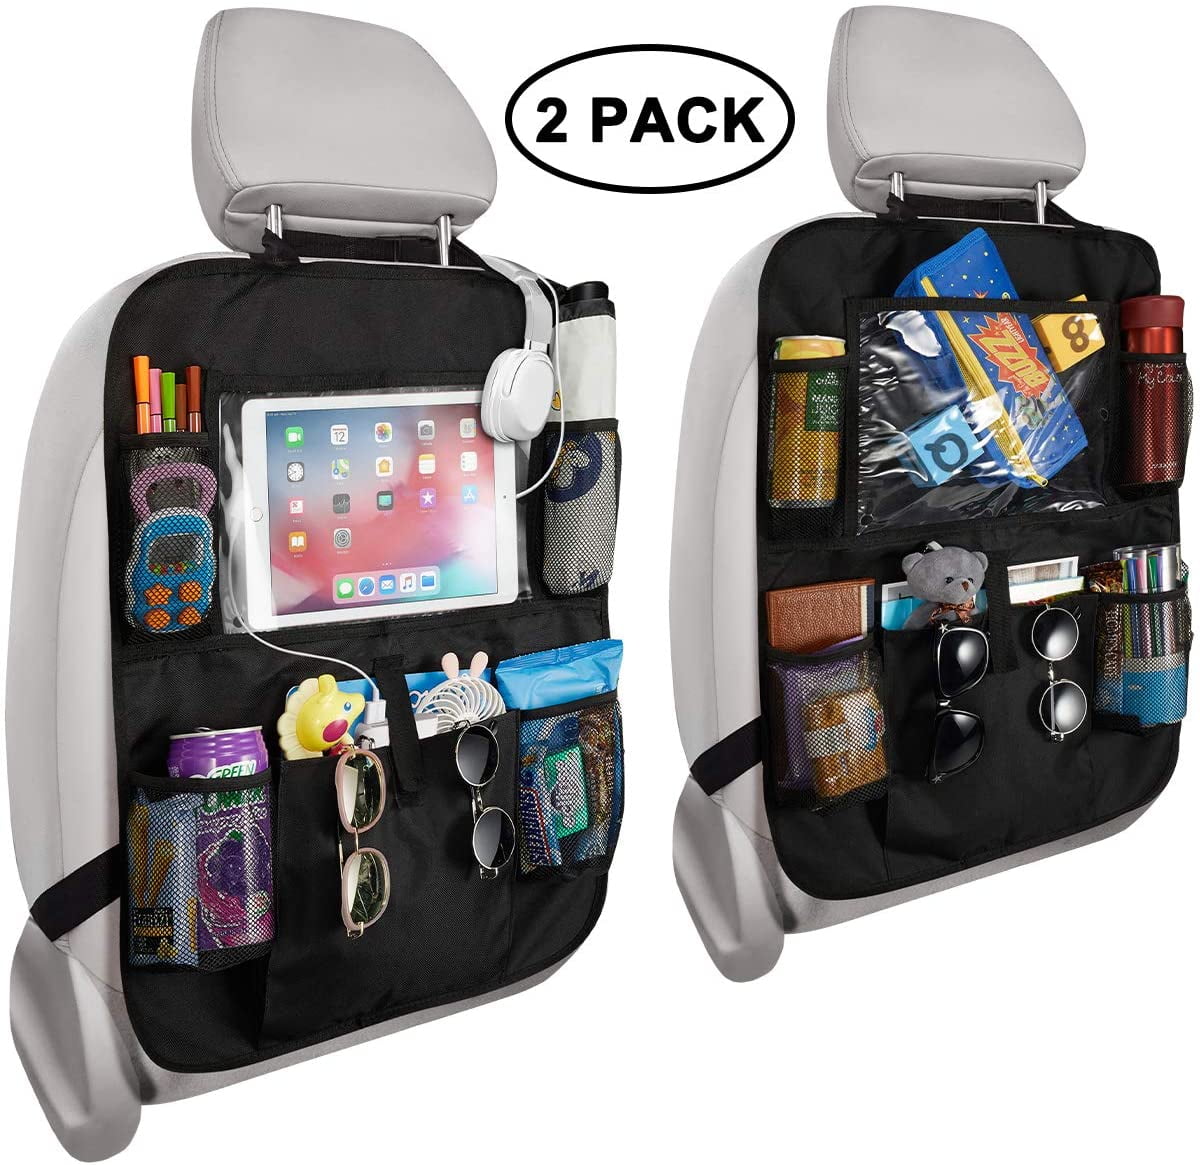 4 Insulated Cup Holders 2 Pack Large 10 Inch Tablet Holder Universal fit Kool Kaddy Backseat Organizer 4 Port USB Charging Station 